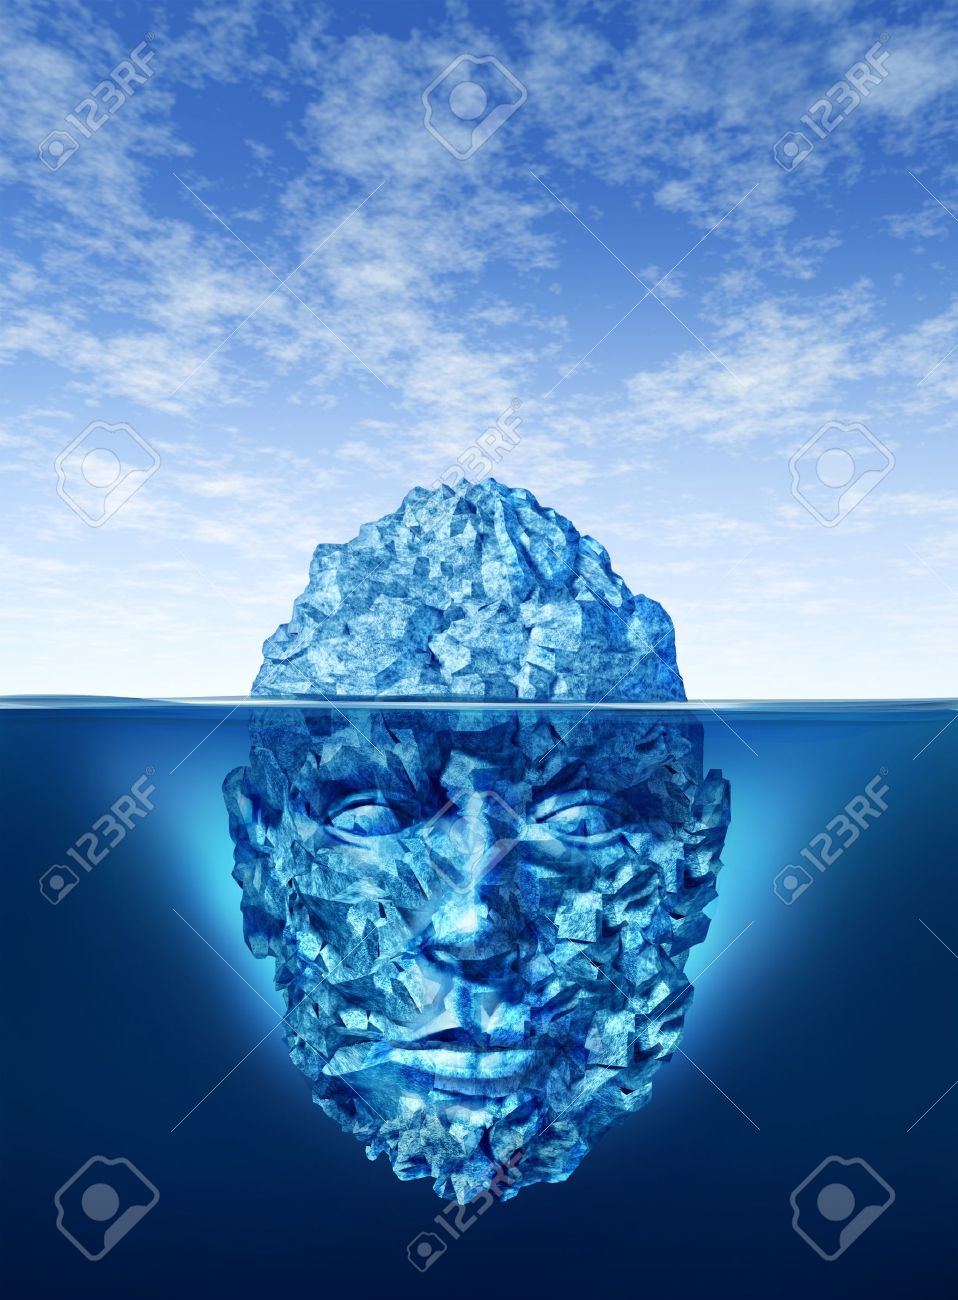 15418171-Exploration-and-discovery-concept-with-an-iceberg-floating-on-a-blue-ocean-and-the-underwater-portio-Stock-Photo.jpg